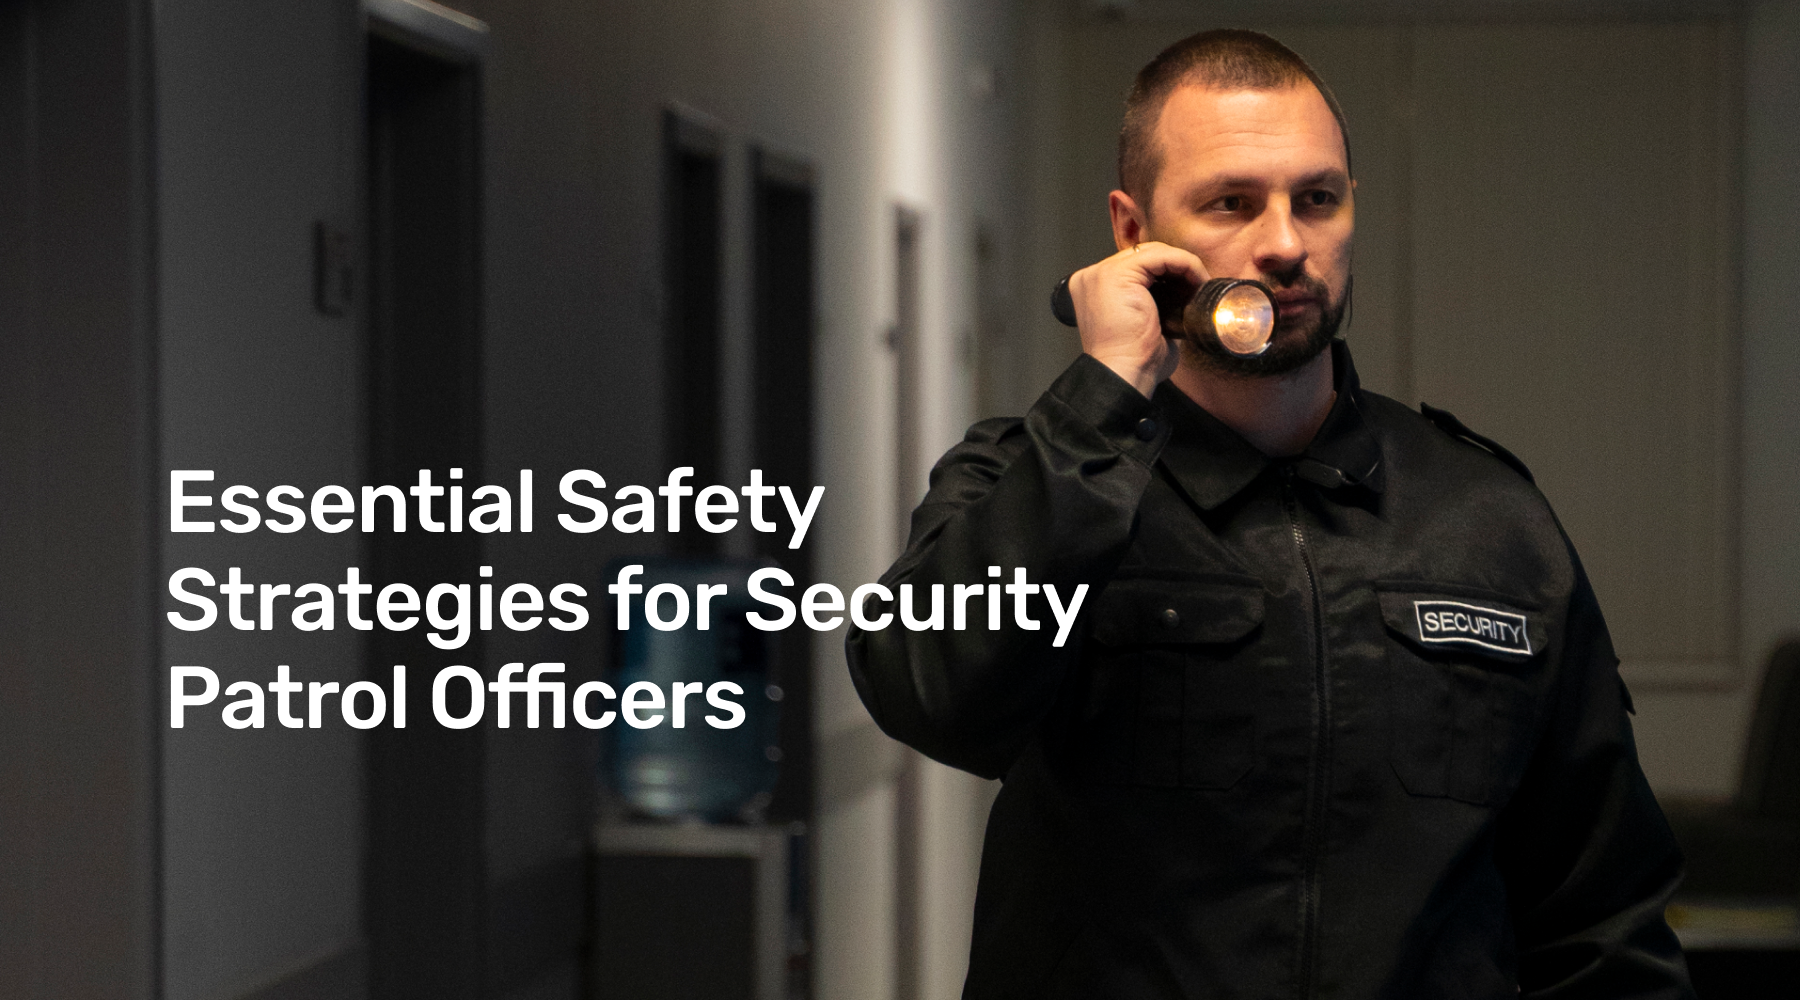 Essential Safety Strategies for Security Patrol Officers